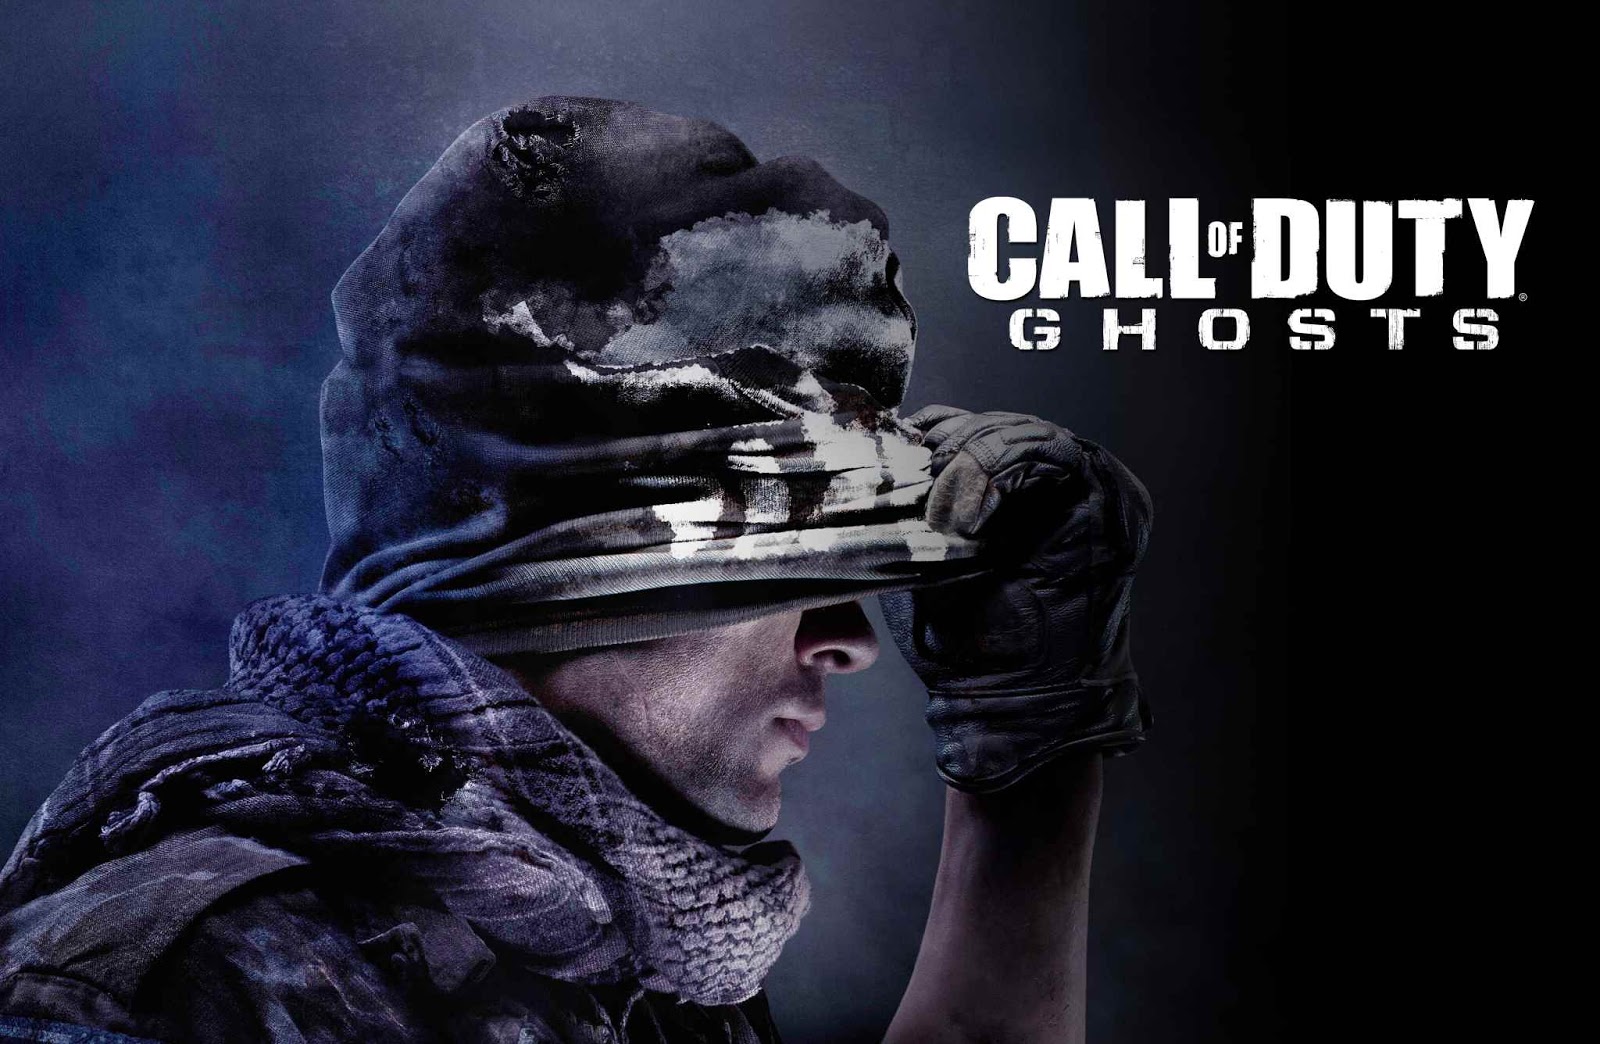 Call of duty ghosts 2